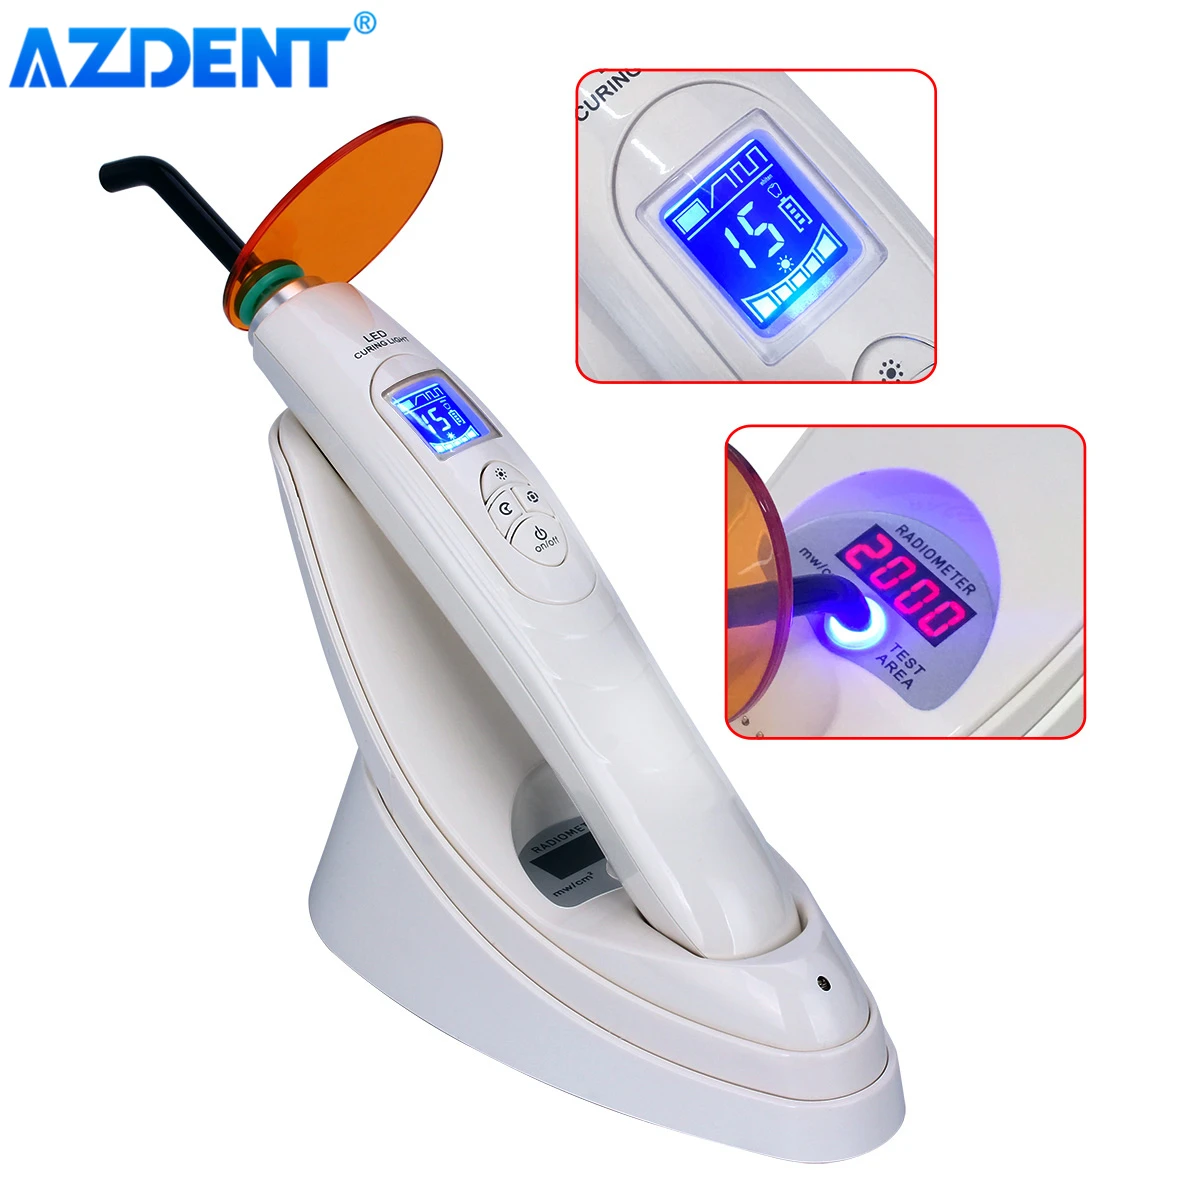 

AZDENT Dental Curing Light LED Wireless Optical Fiber Curing Lamp 800-2000mw/cm² Three Gear Output Adjustable Timing